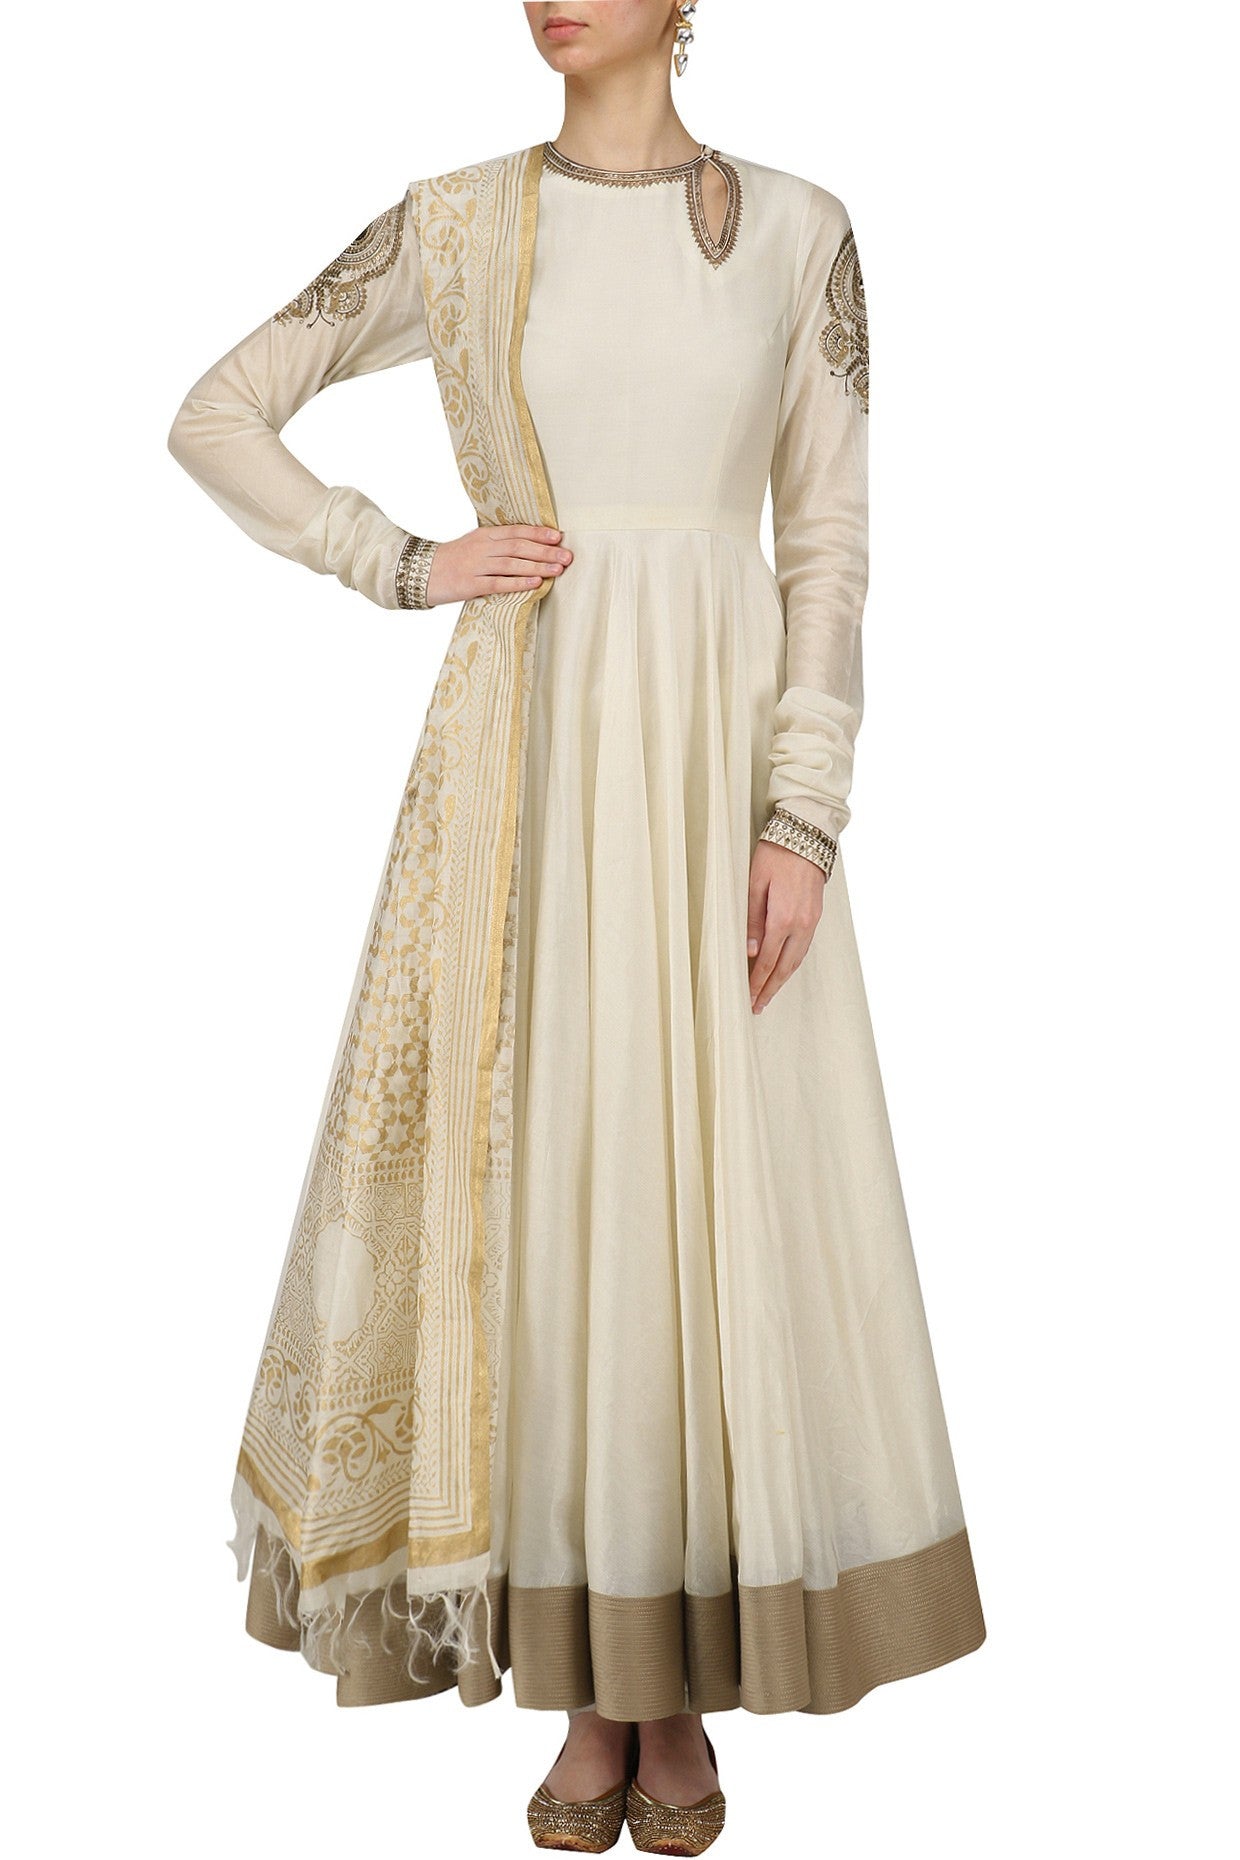 Off White and Gold Anarkali Set - Indian Clothing in Denver, CO, Aurora, CO, Boulder, CO, Fort Collins, CO, Colorado Springs, CO, Parker, CO, Highlands Ranch, CO, Cherry Creek, CO, Centennial, CO, and Longmont, CO. Nationwide shipping USA - India Fashion X